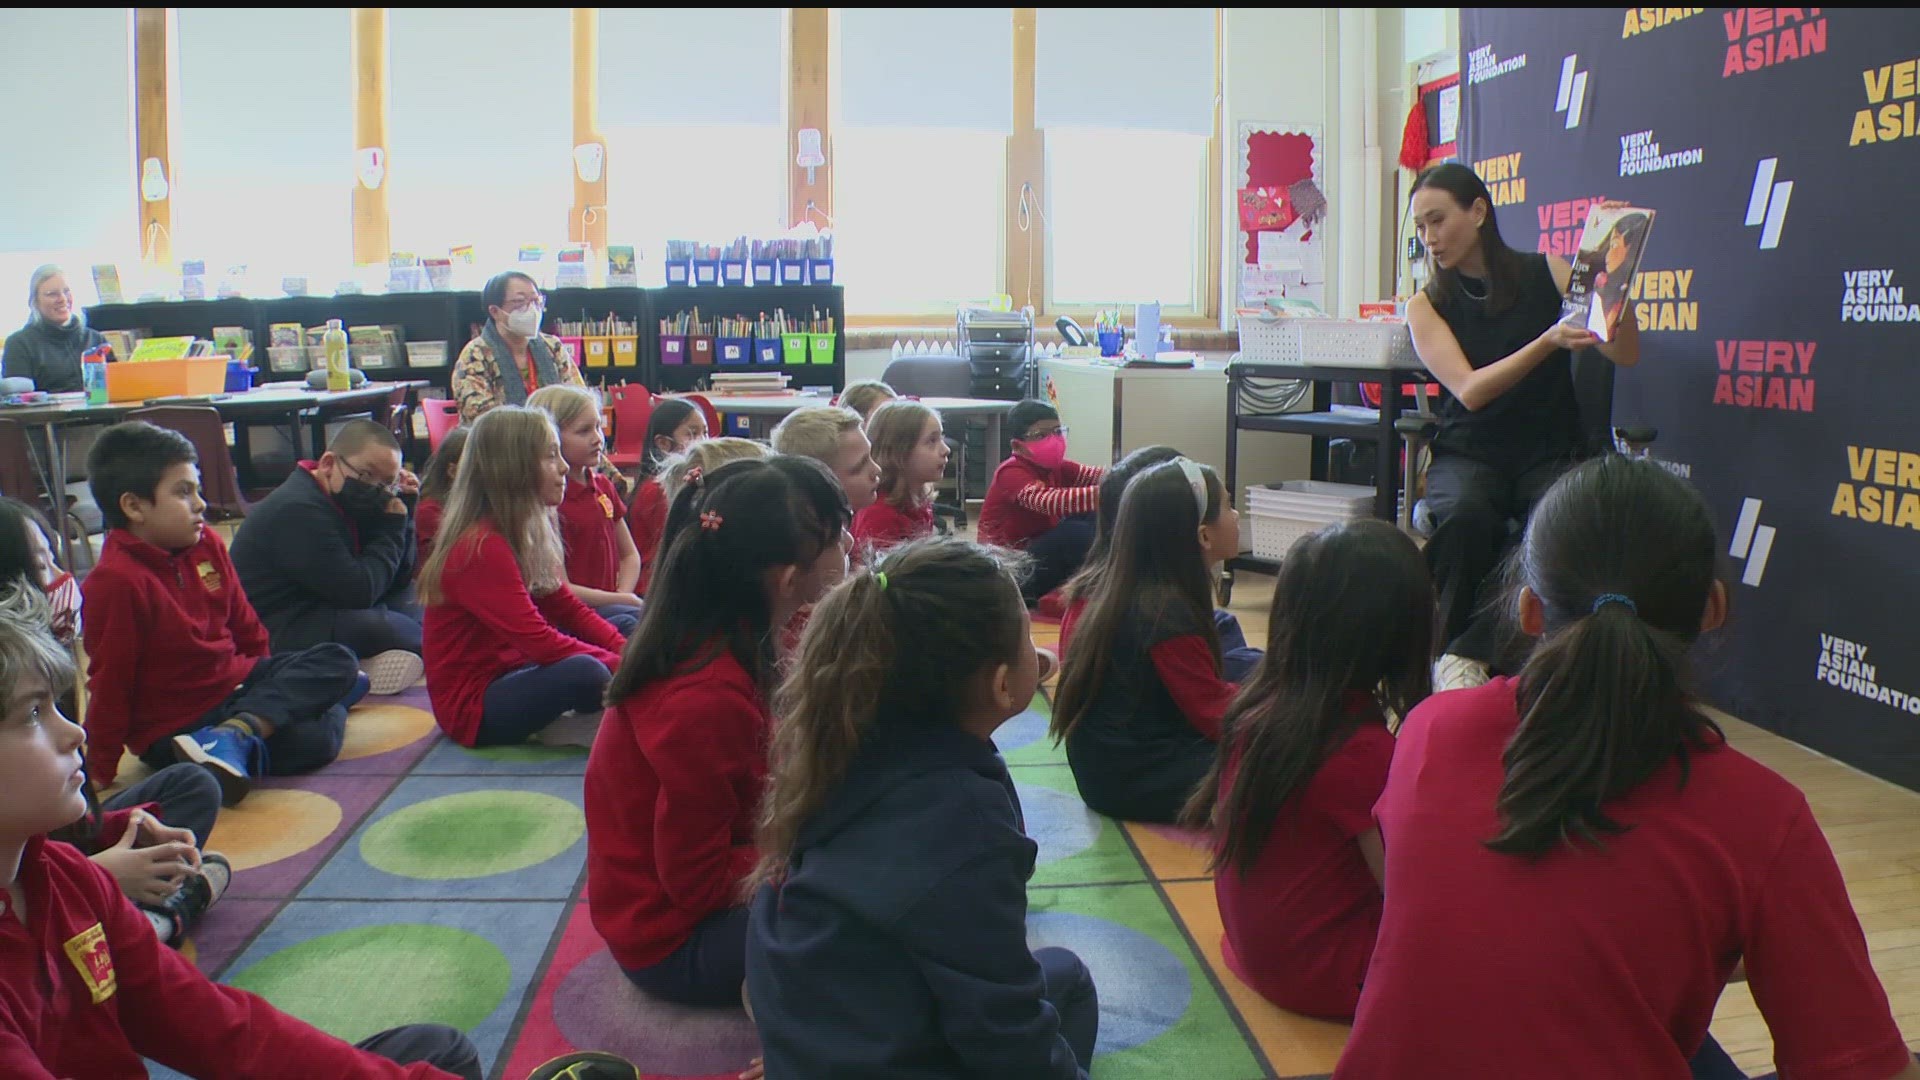 Former KARE 11 Anchor Gia Vang and Michelle Li, co-founders of The Very Asian Foundation, visited two St. Paul schools to donate books by AANHPI authors.